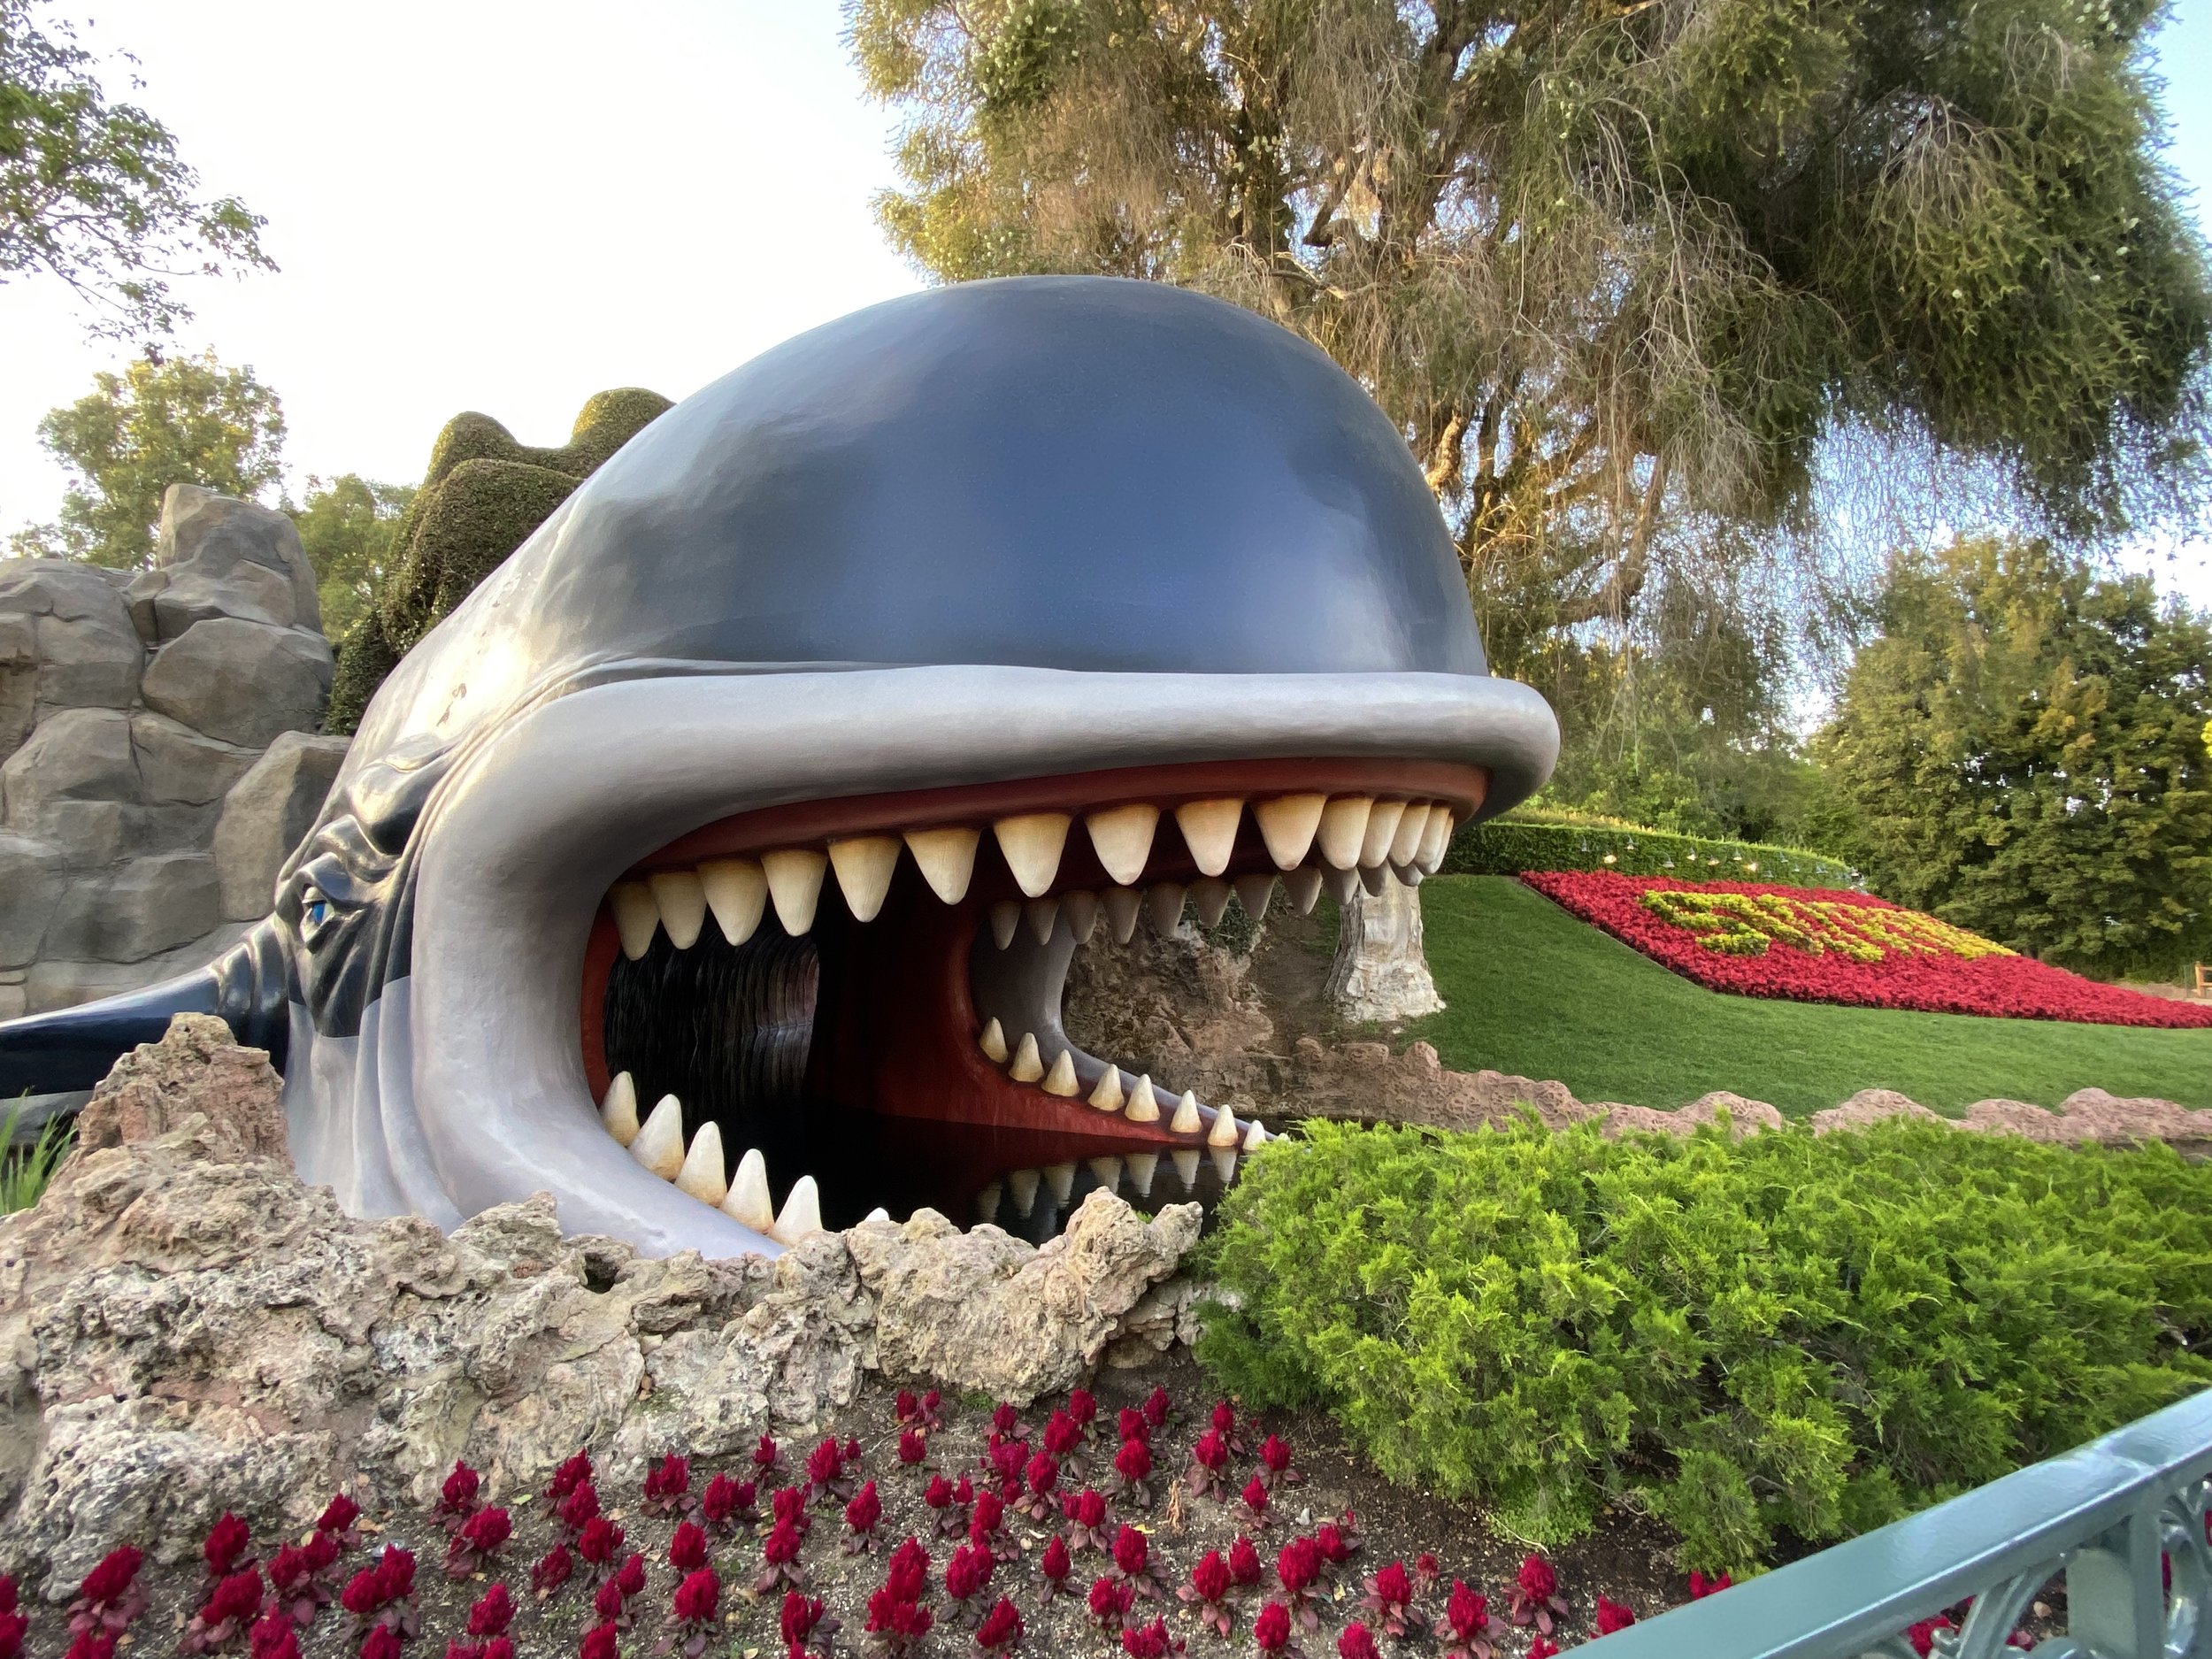  Whale from Pinocchio in Storybookland Canal ride 